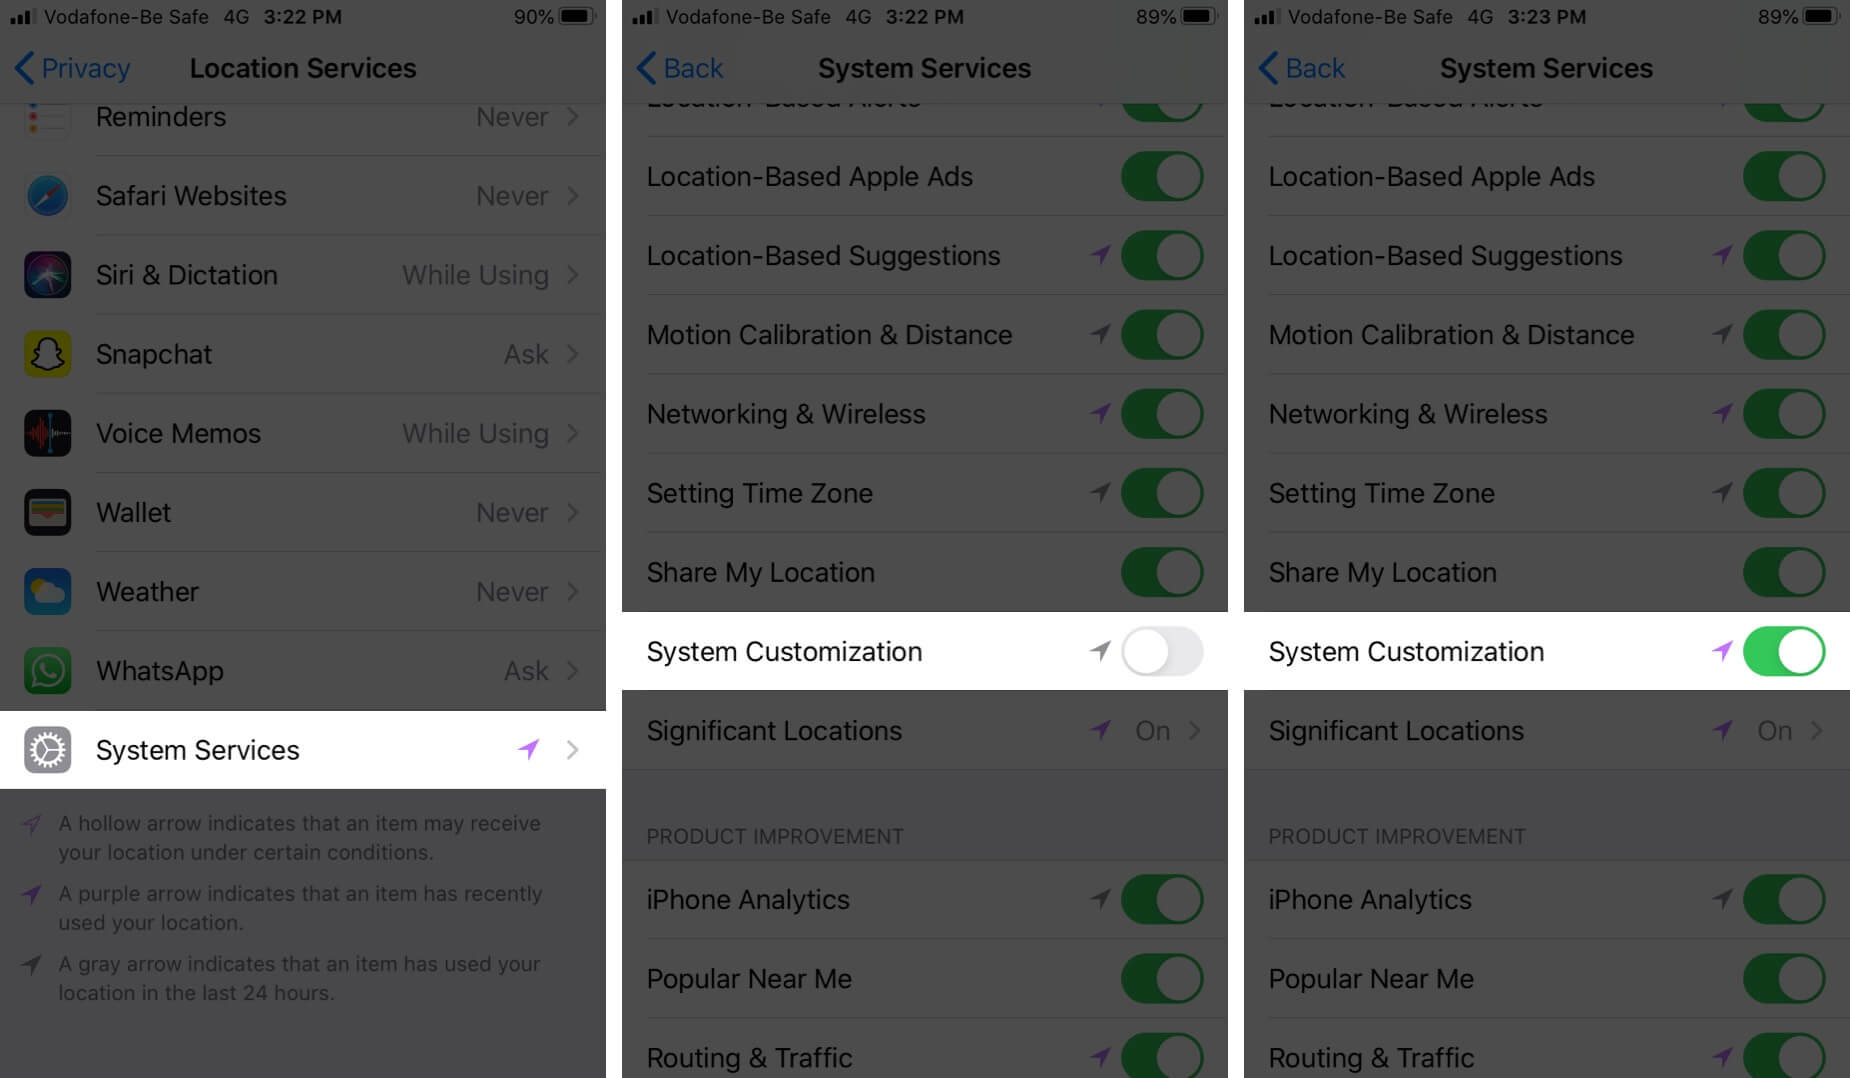 Enable System Customization on iPhone